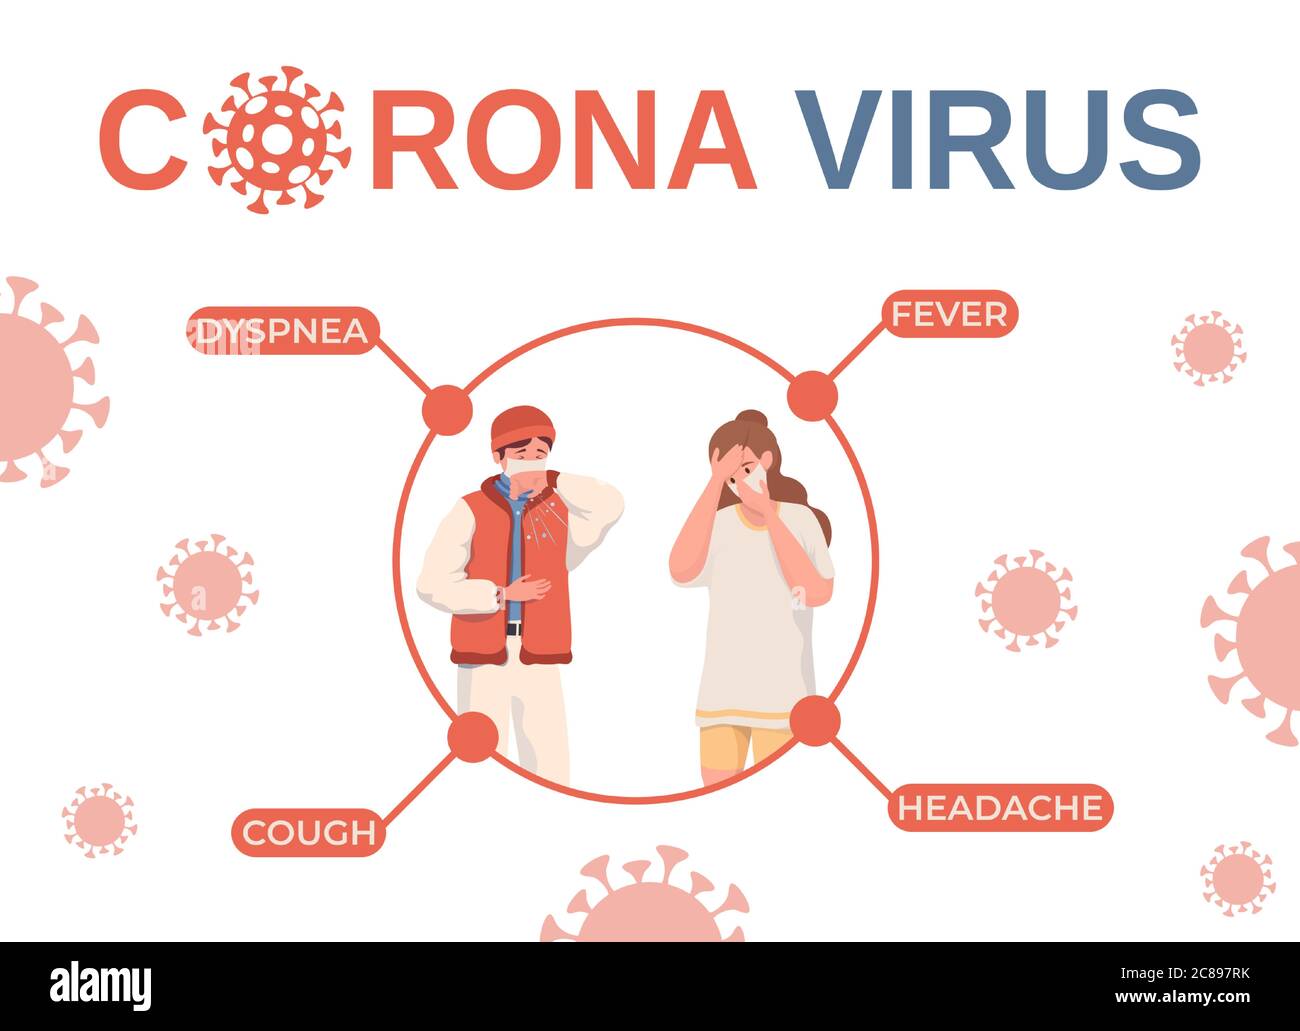 Coronavirus symptoms vector flat infographic design. Young man and woman in medicine face masks have a cough, dyspnea, fever, and headache. Quarantine, isolation during flu sickness concept. Stock Vector